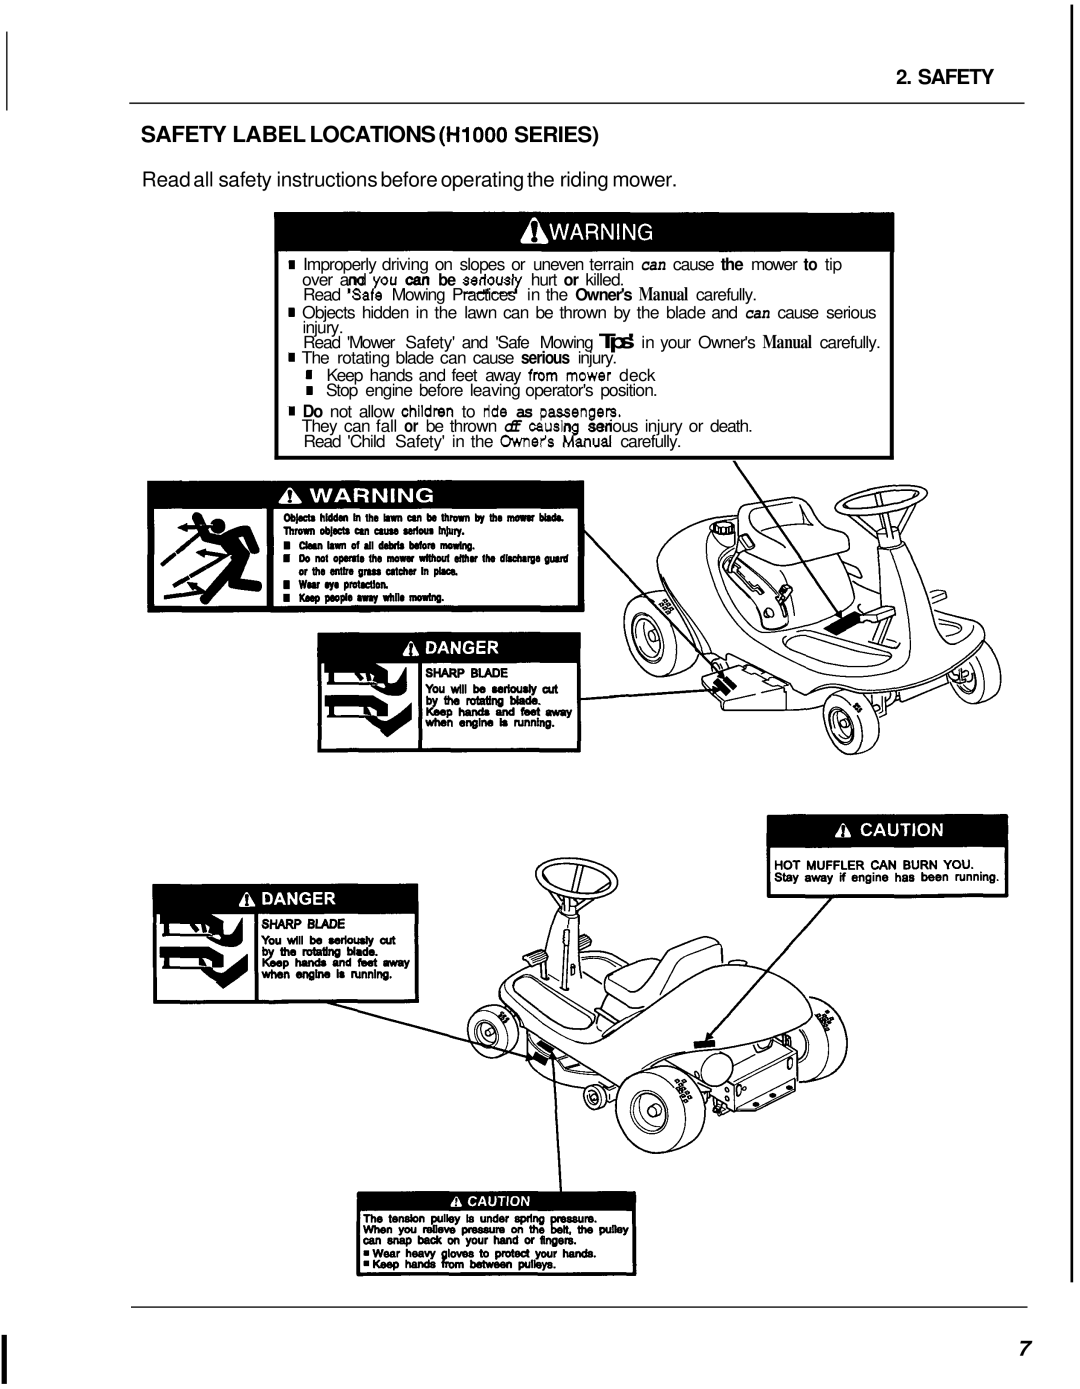 Honda Power Equipment H3000 manual SAFETY LABEL LOCATIONS H1000SERIES, Safety 